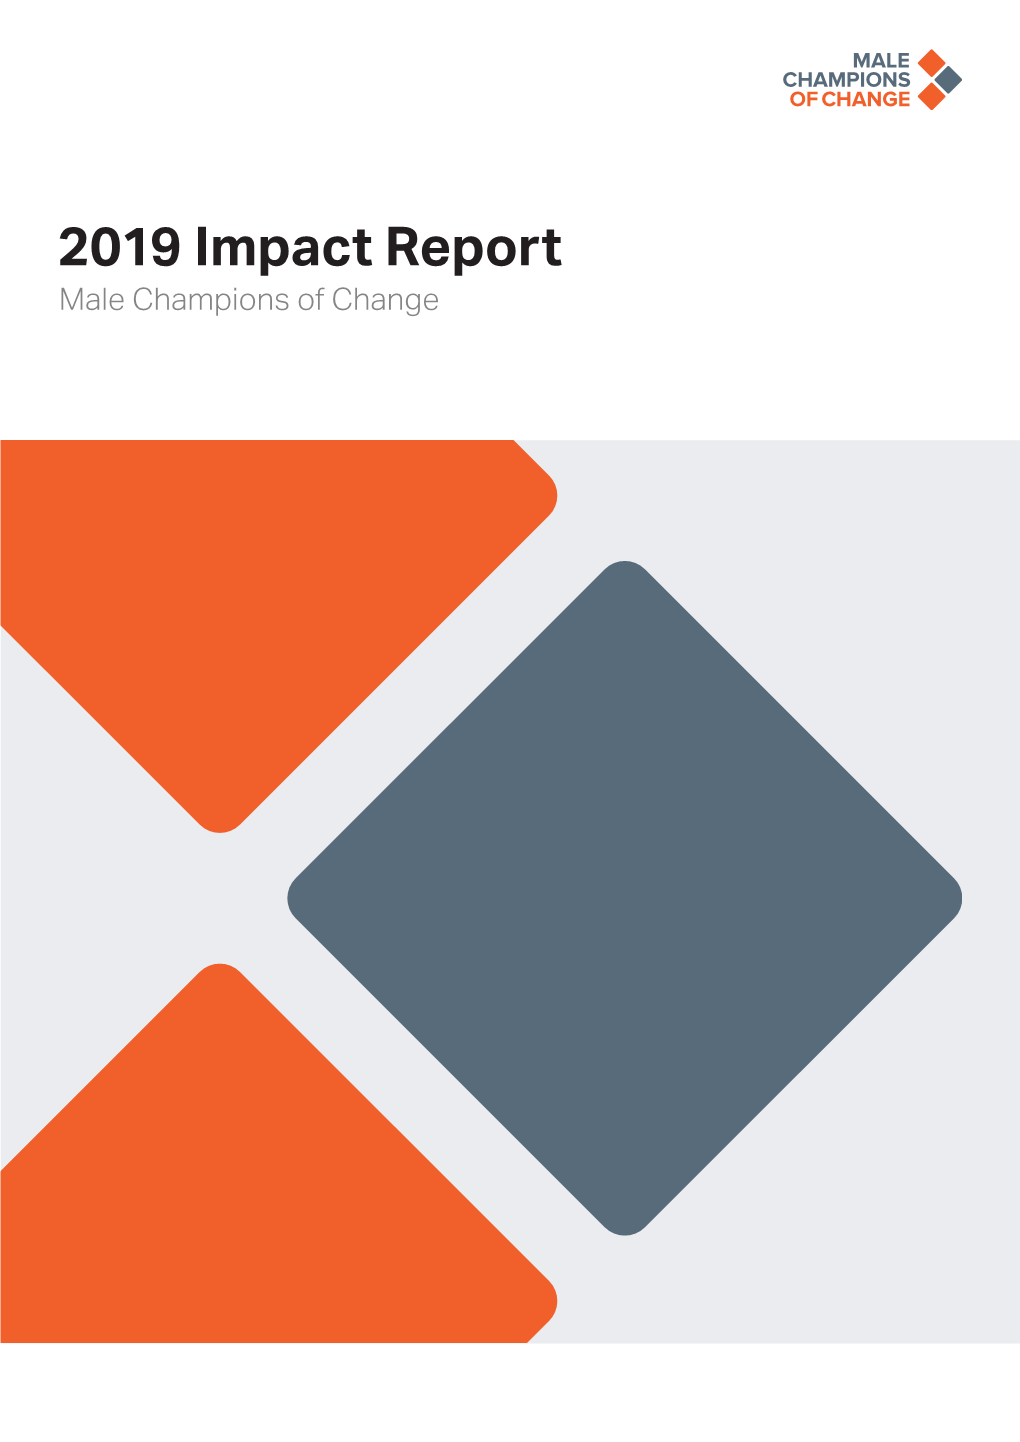 2019 Impact Report Male Champions of Change Contents